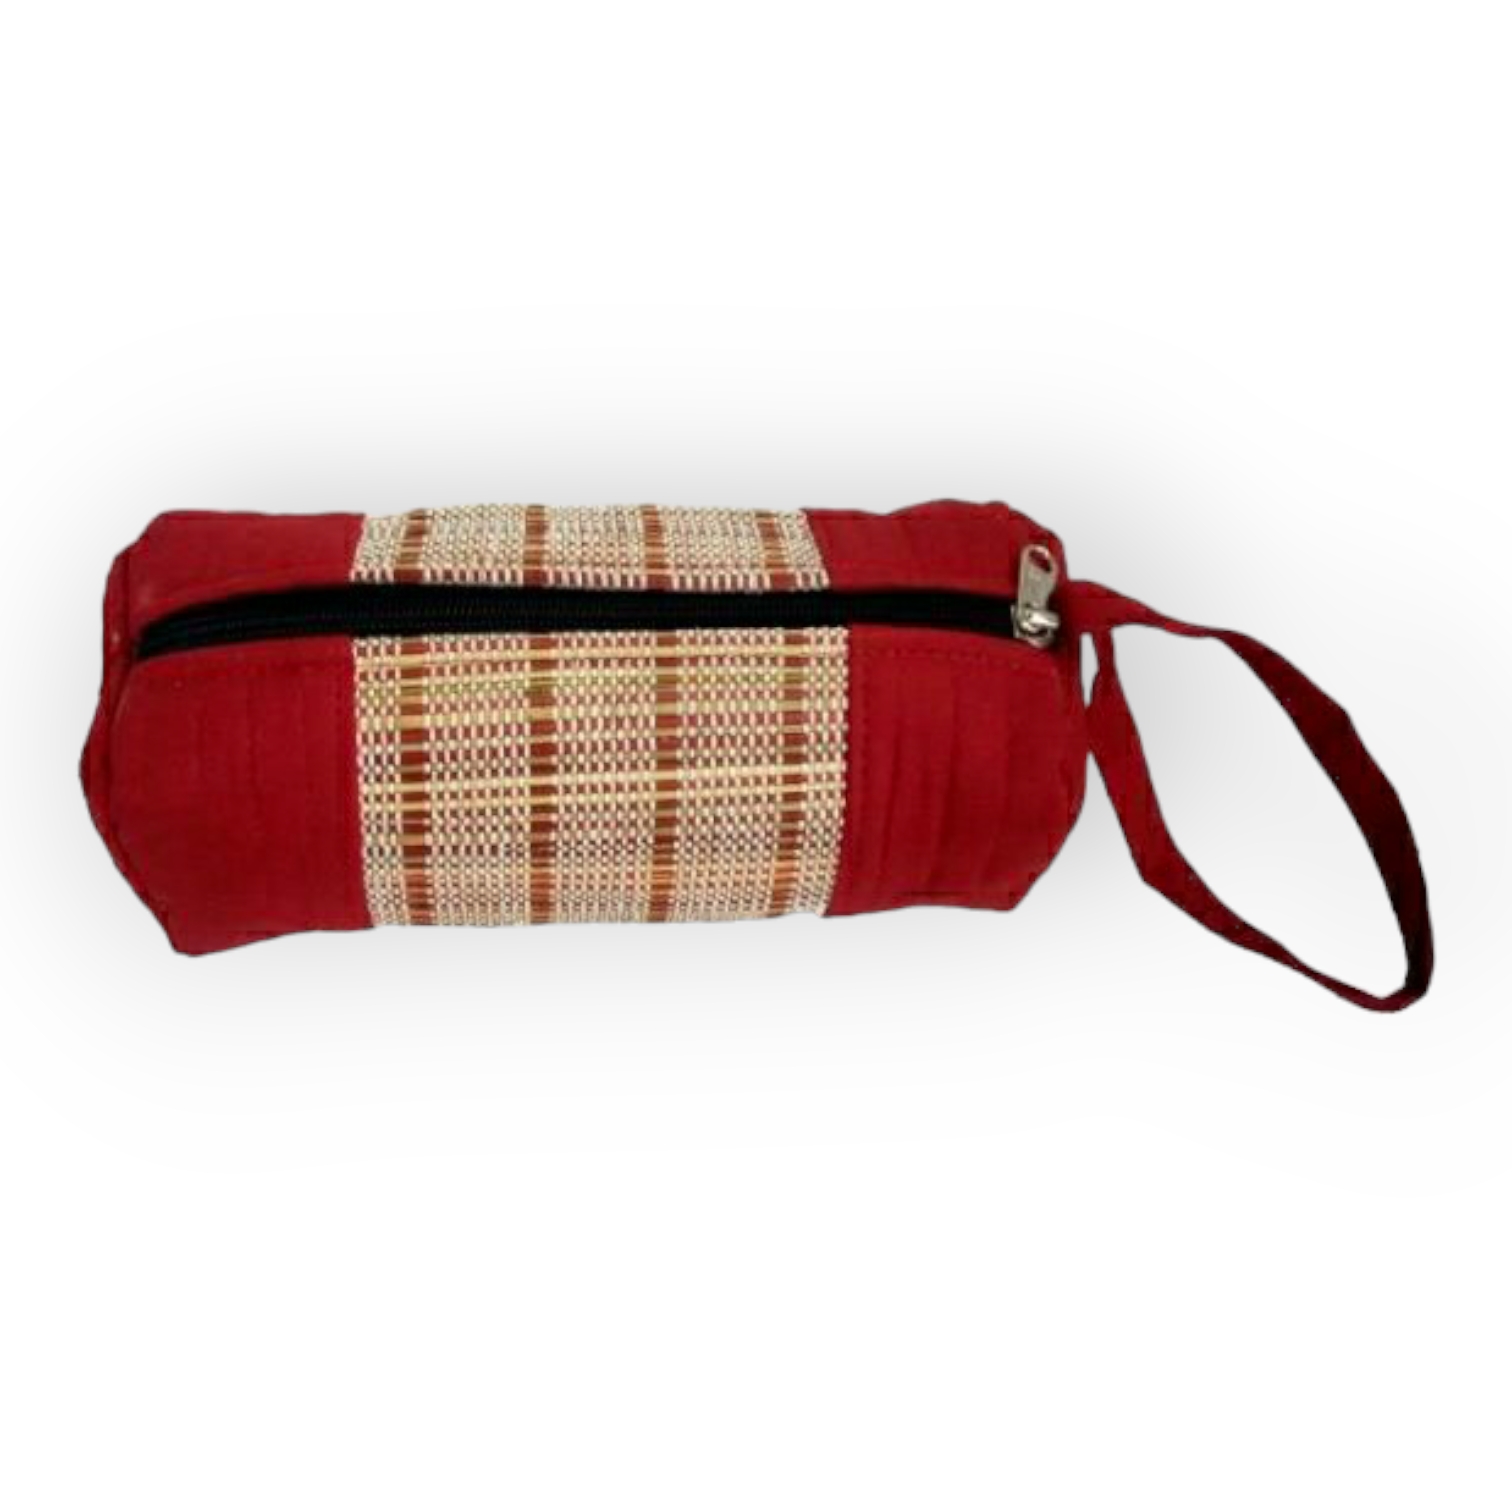 Madur Kathi Pouch in Maroon Colour